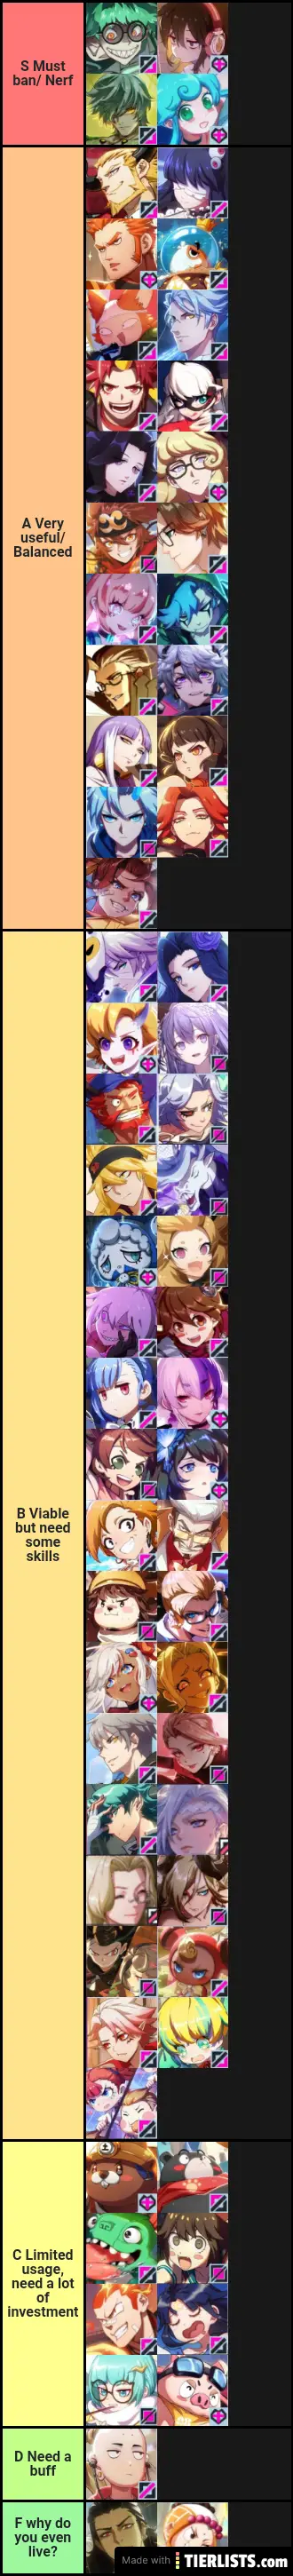 EO heroes based on how easy and powerful they are